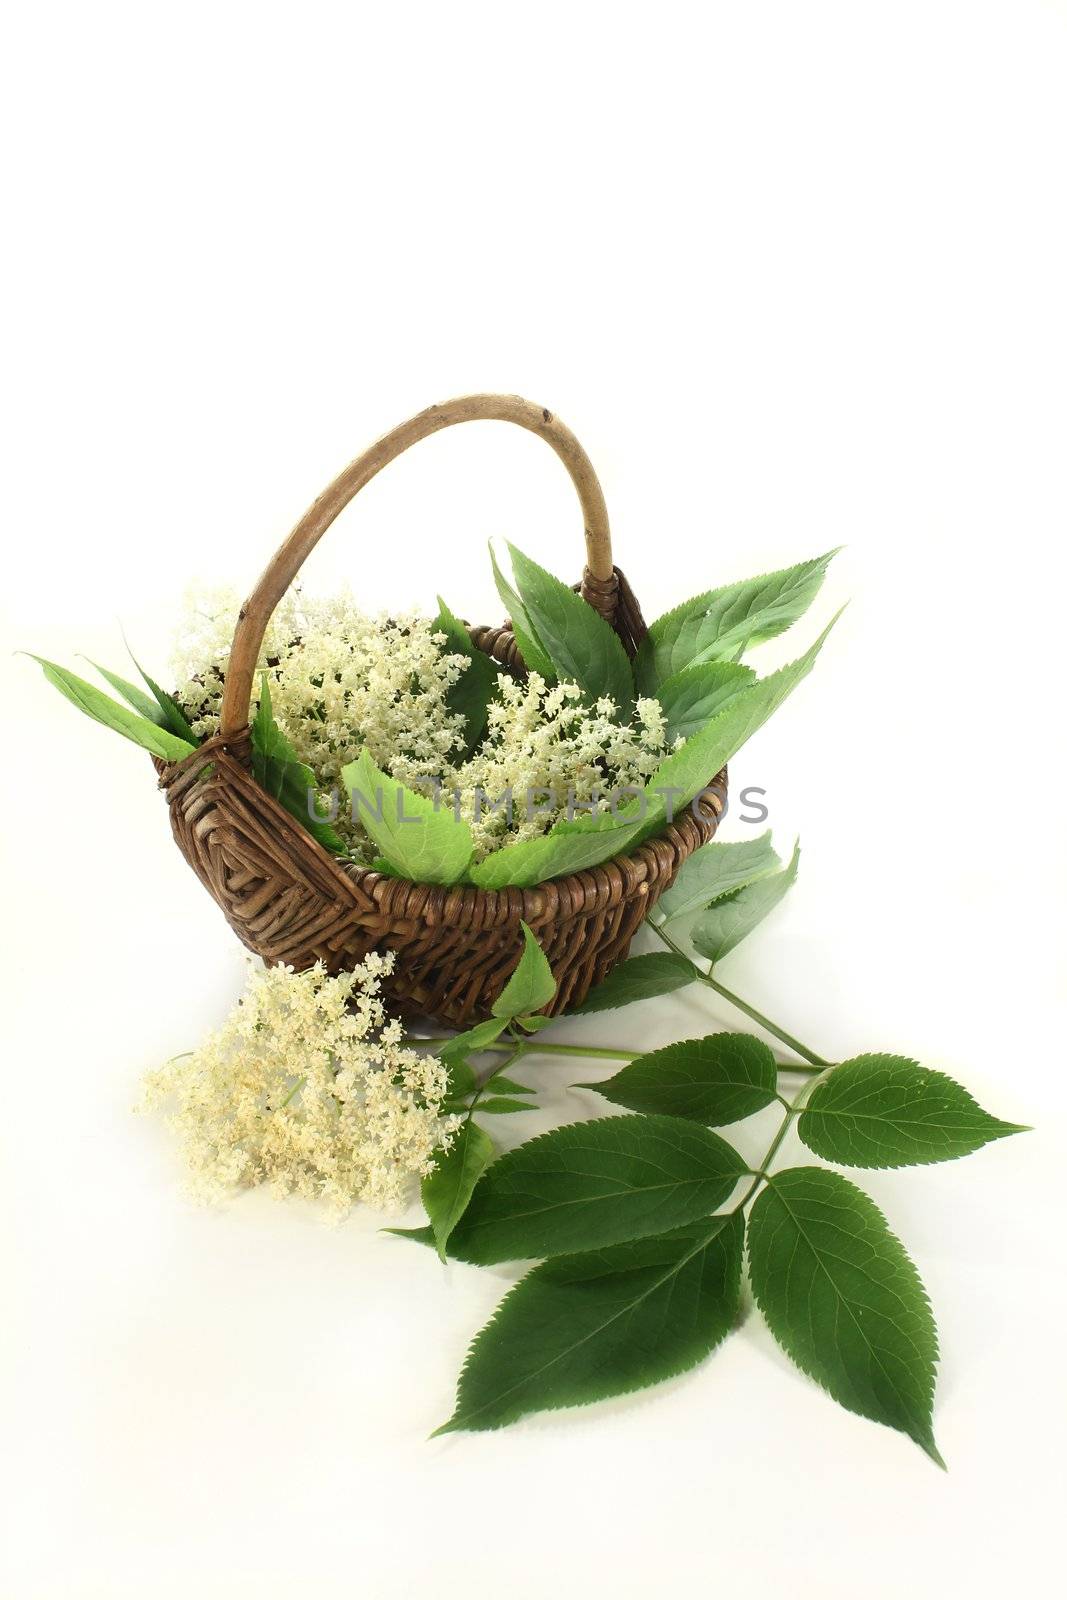 Elderberry flowers and leaves on white background